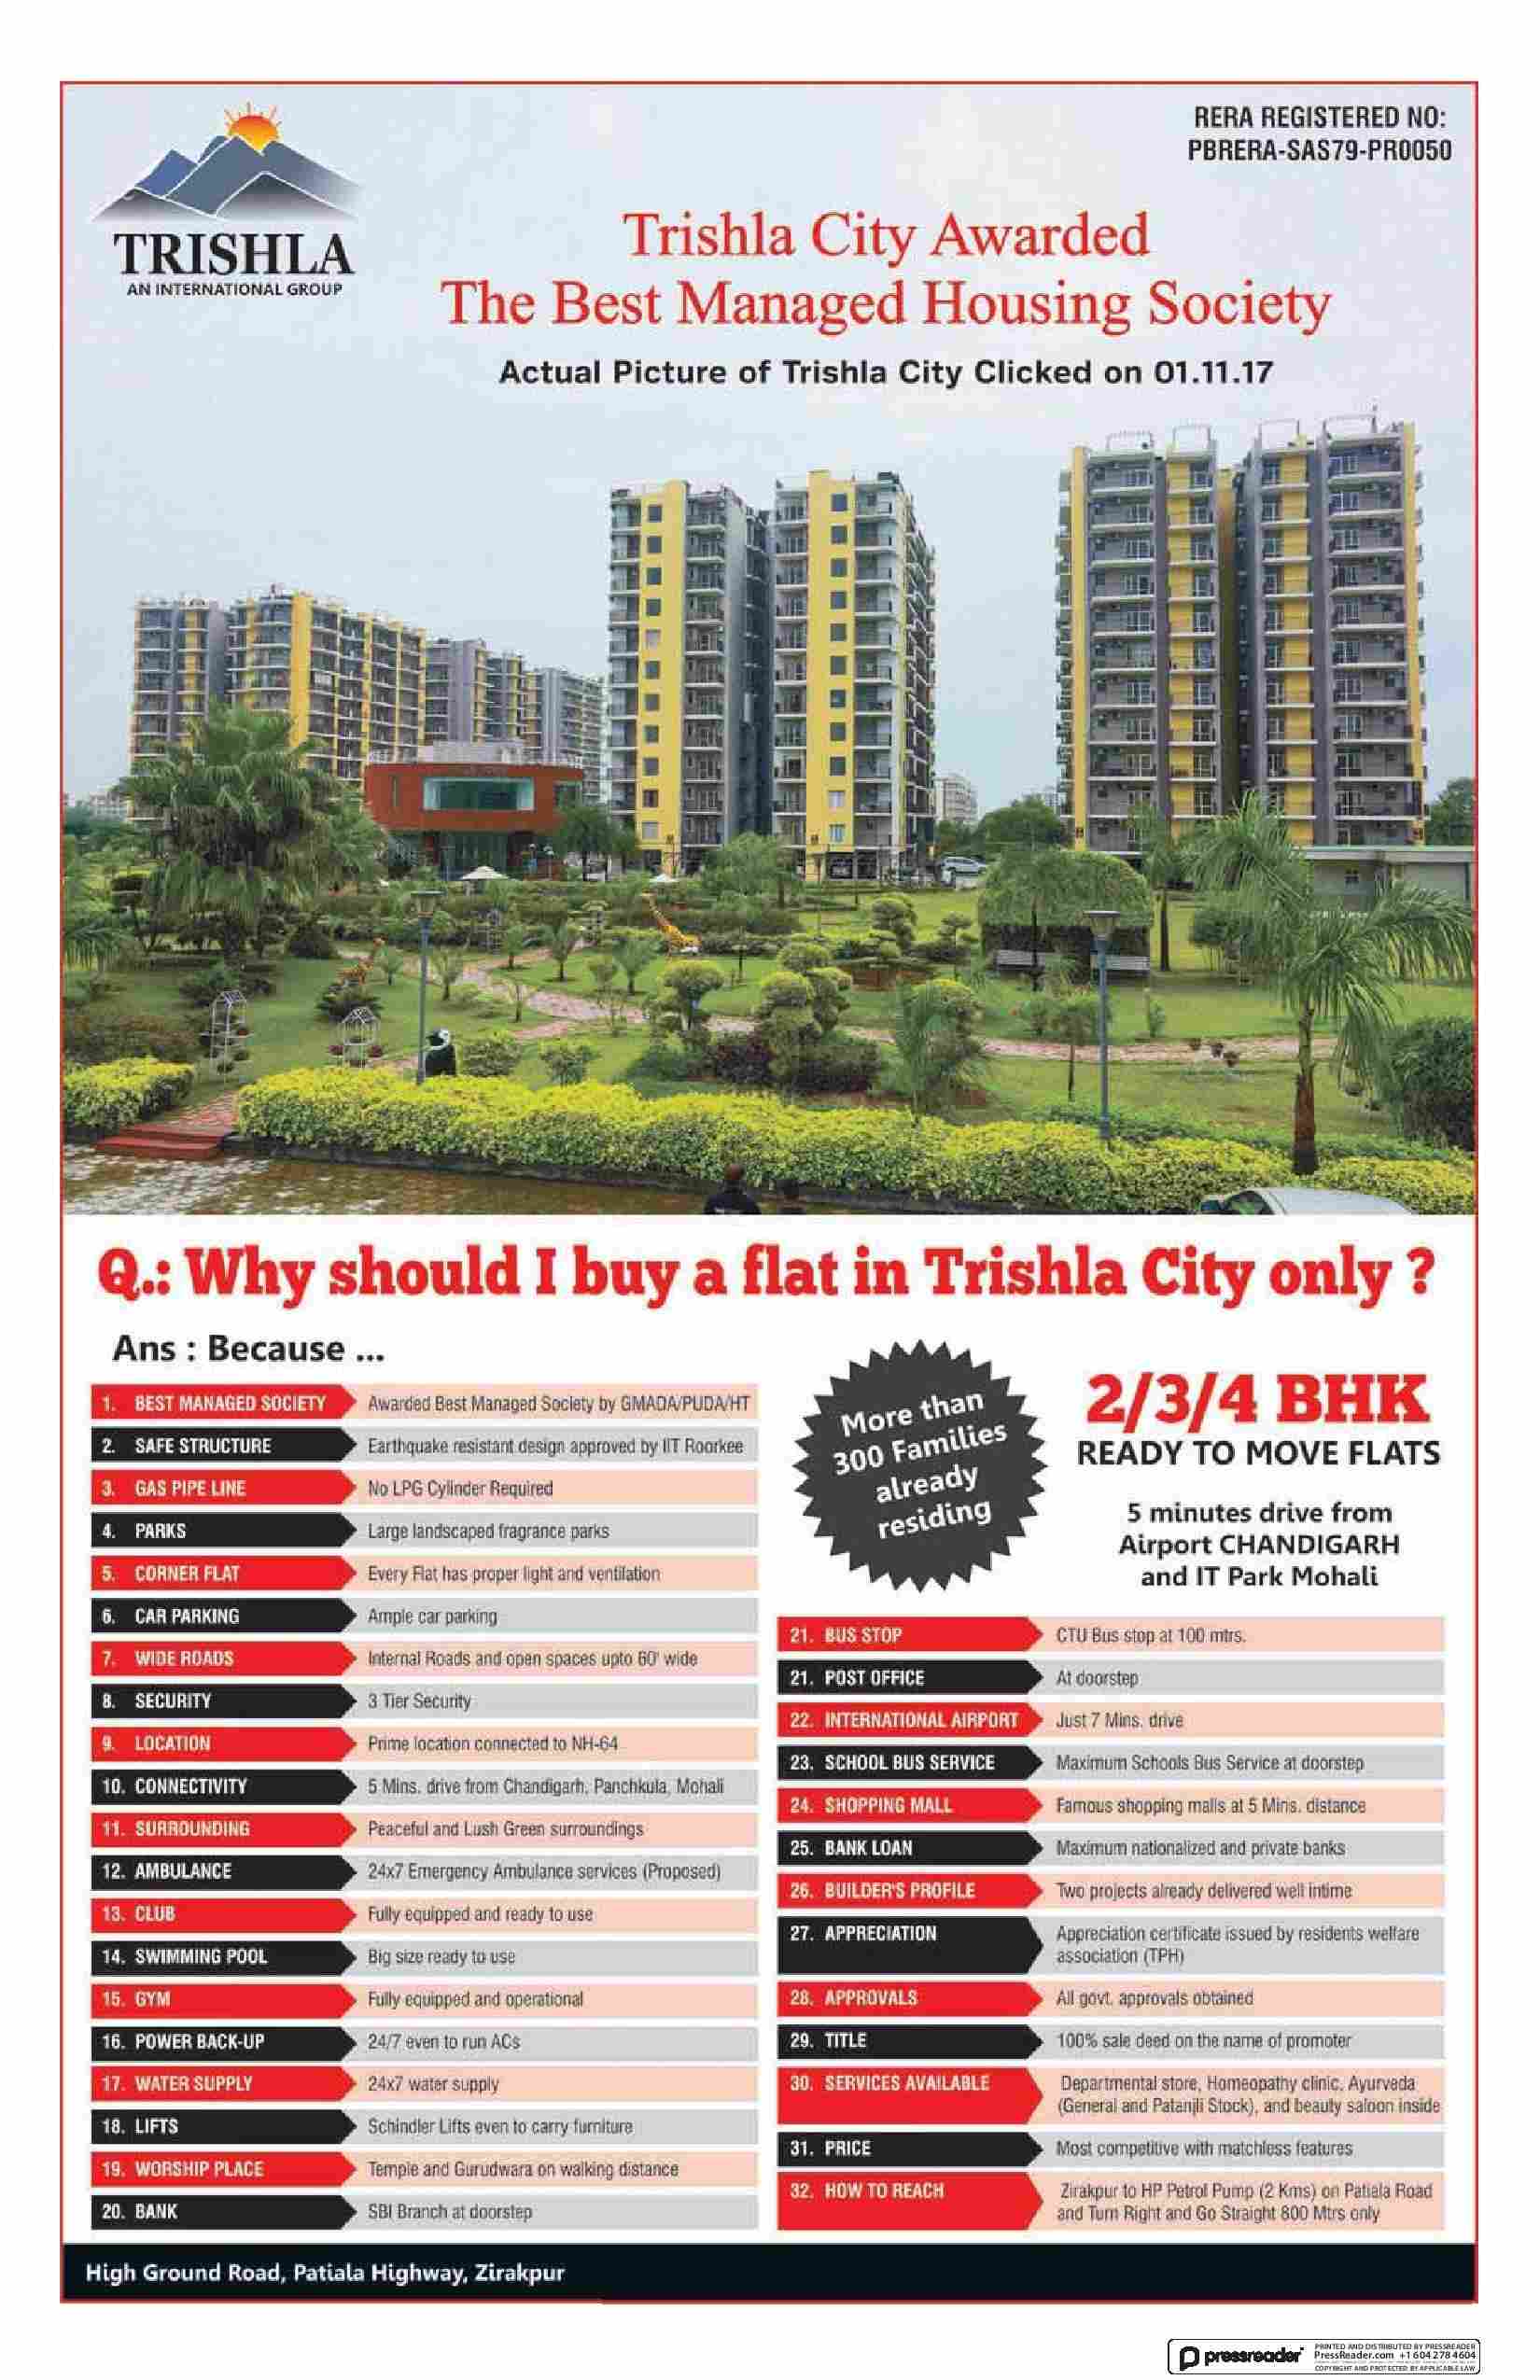 Book ready to move homes at Trishla City in Chandigarh Update